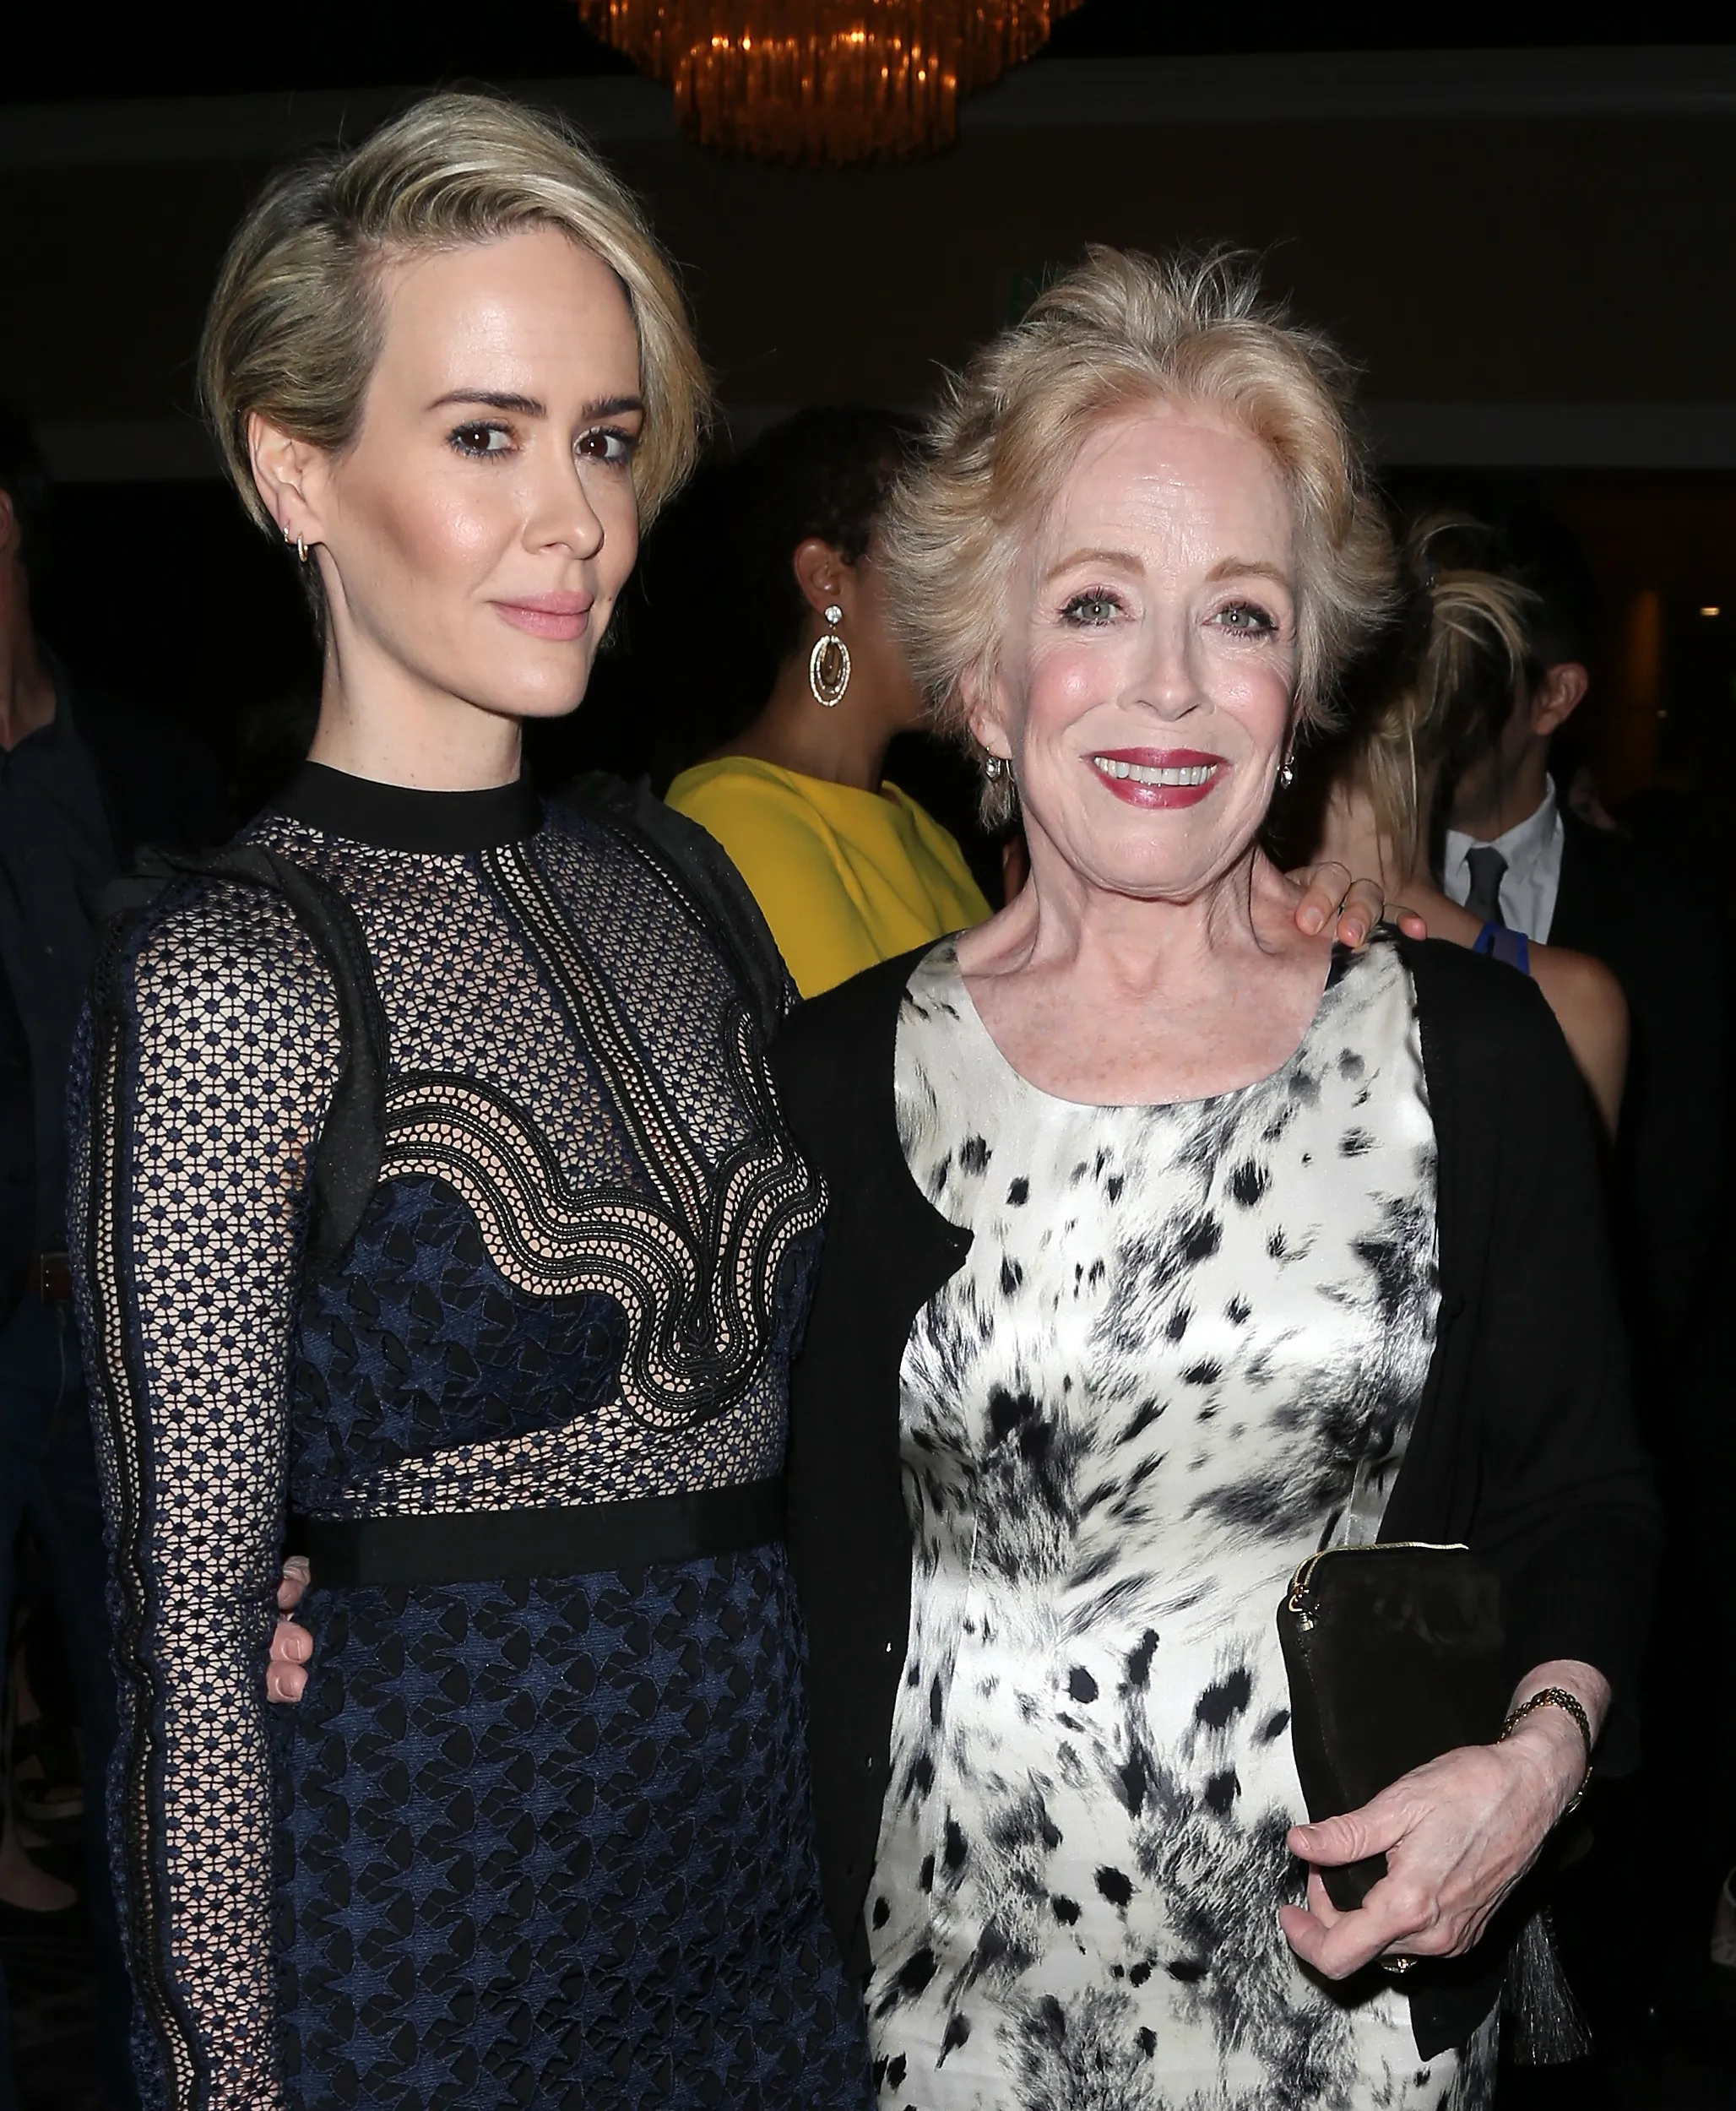 Actresses Sarah Paulson (L) and Holland Taylor attend the 32nd annual Television Critics Association Awards during the 2016 Television Critics Association Summer Tour at The Beverly Hilton Hotel on August 6, 2016 in Beverly Hills, California.